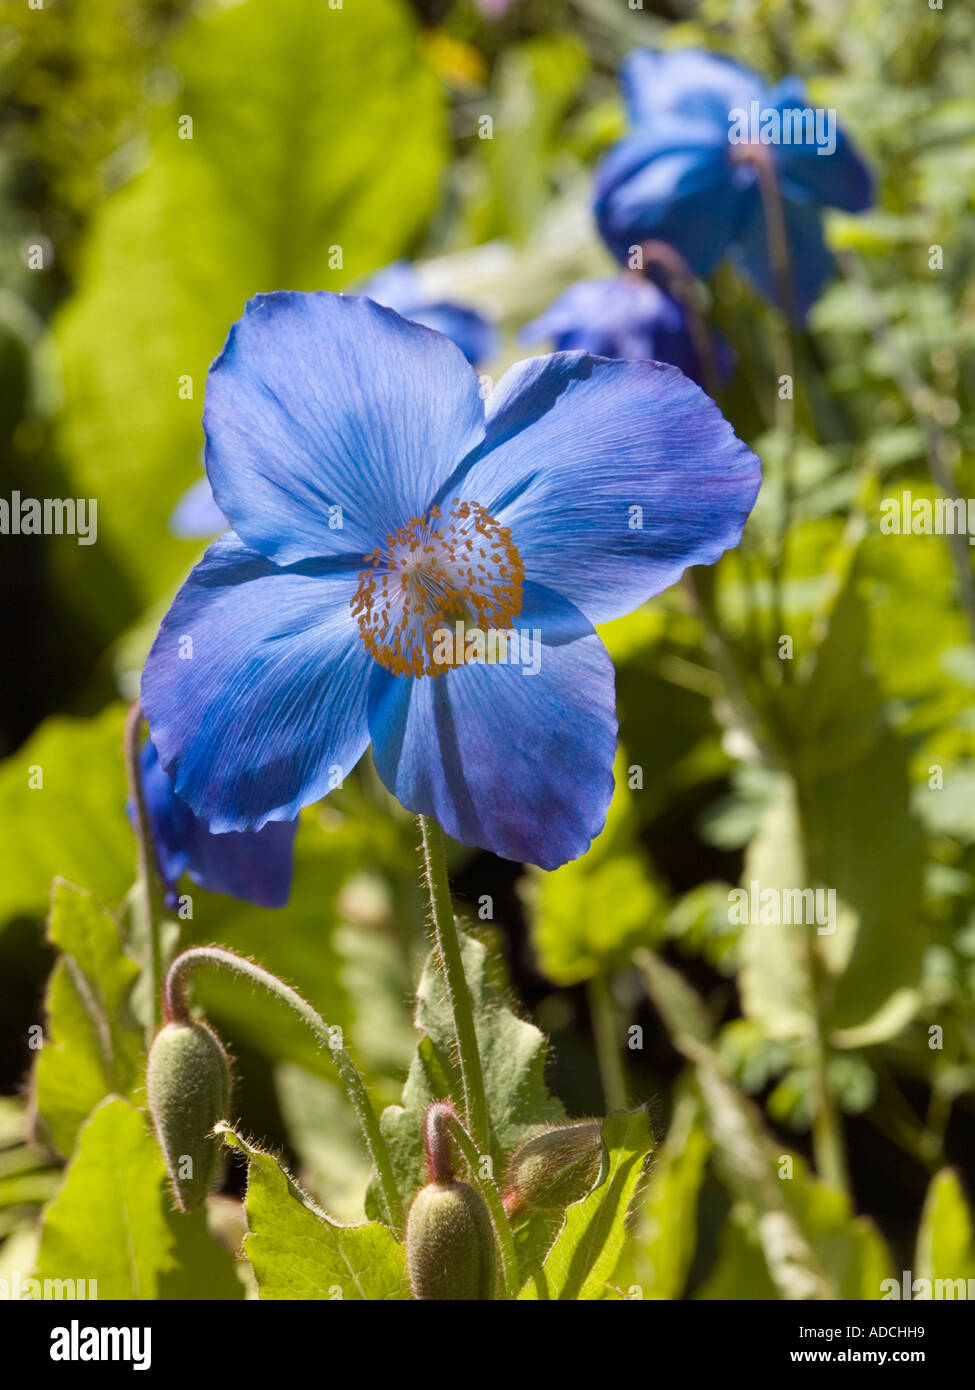 'Himalayan Poppy' Meconopsis grandis blue form backlit in close up in a garden in early summer Stock Photo